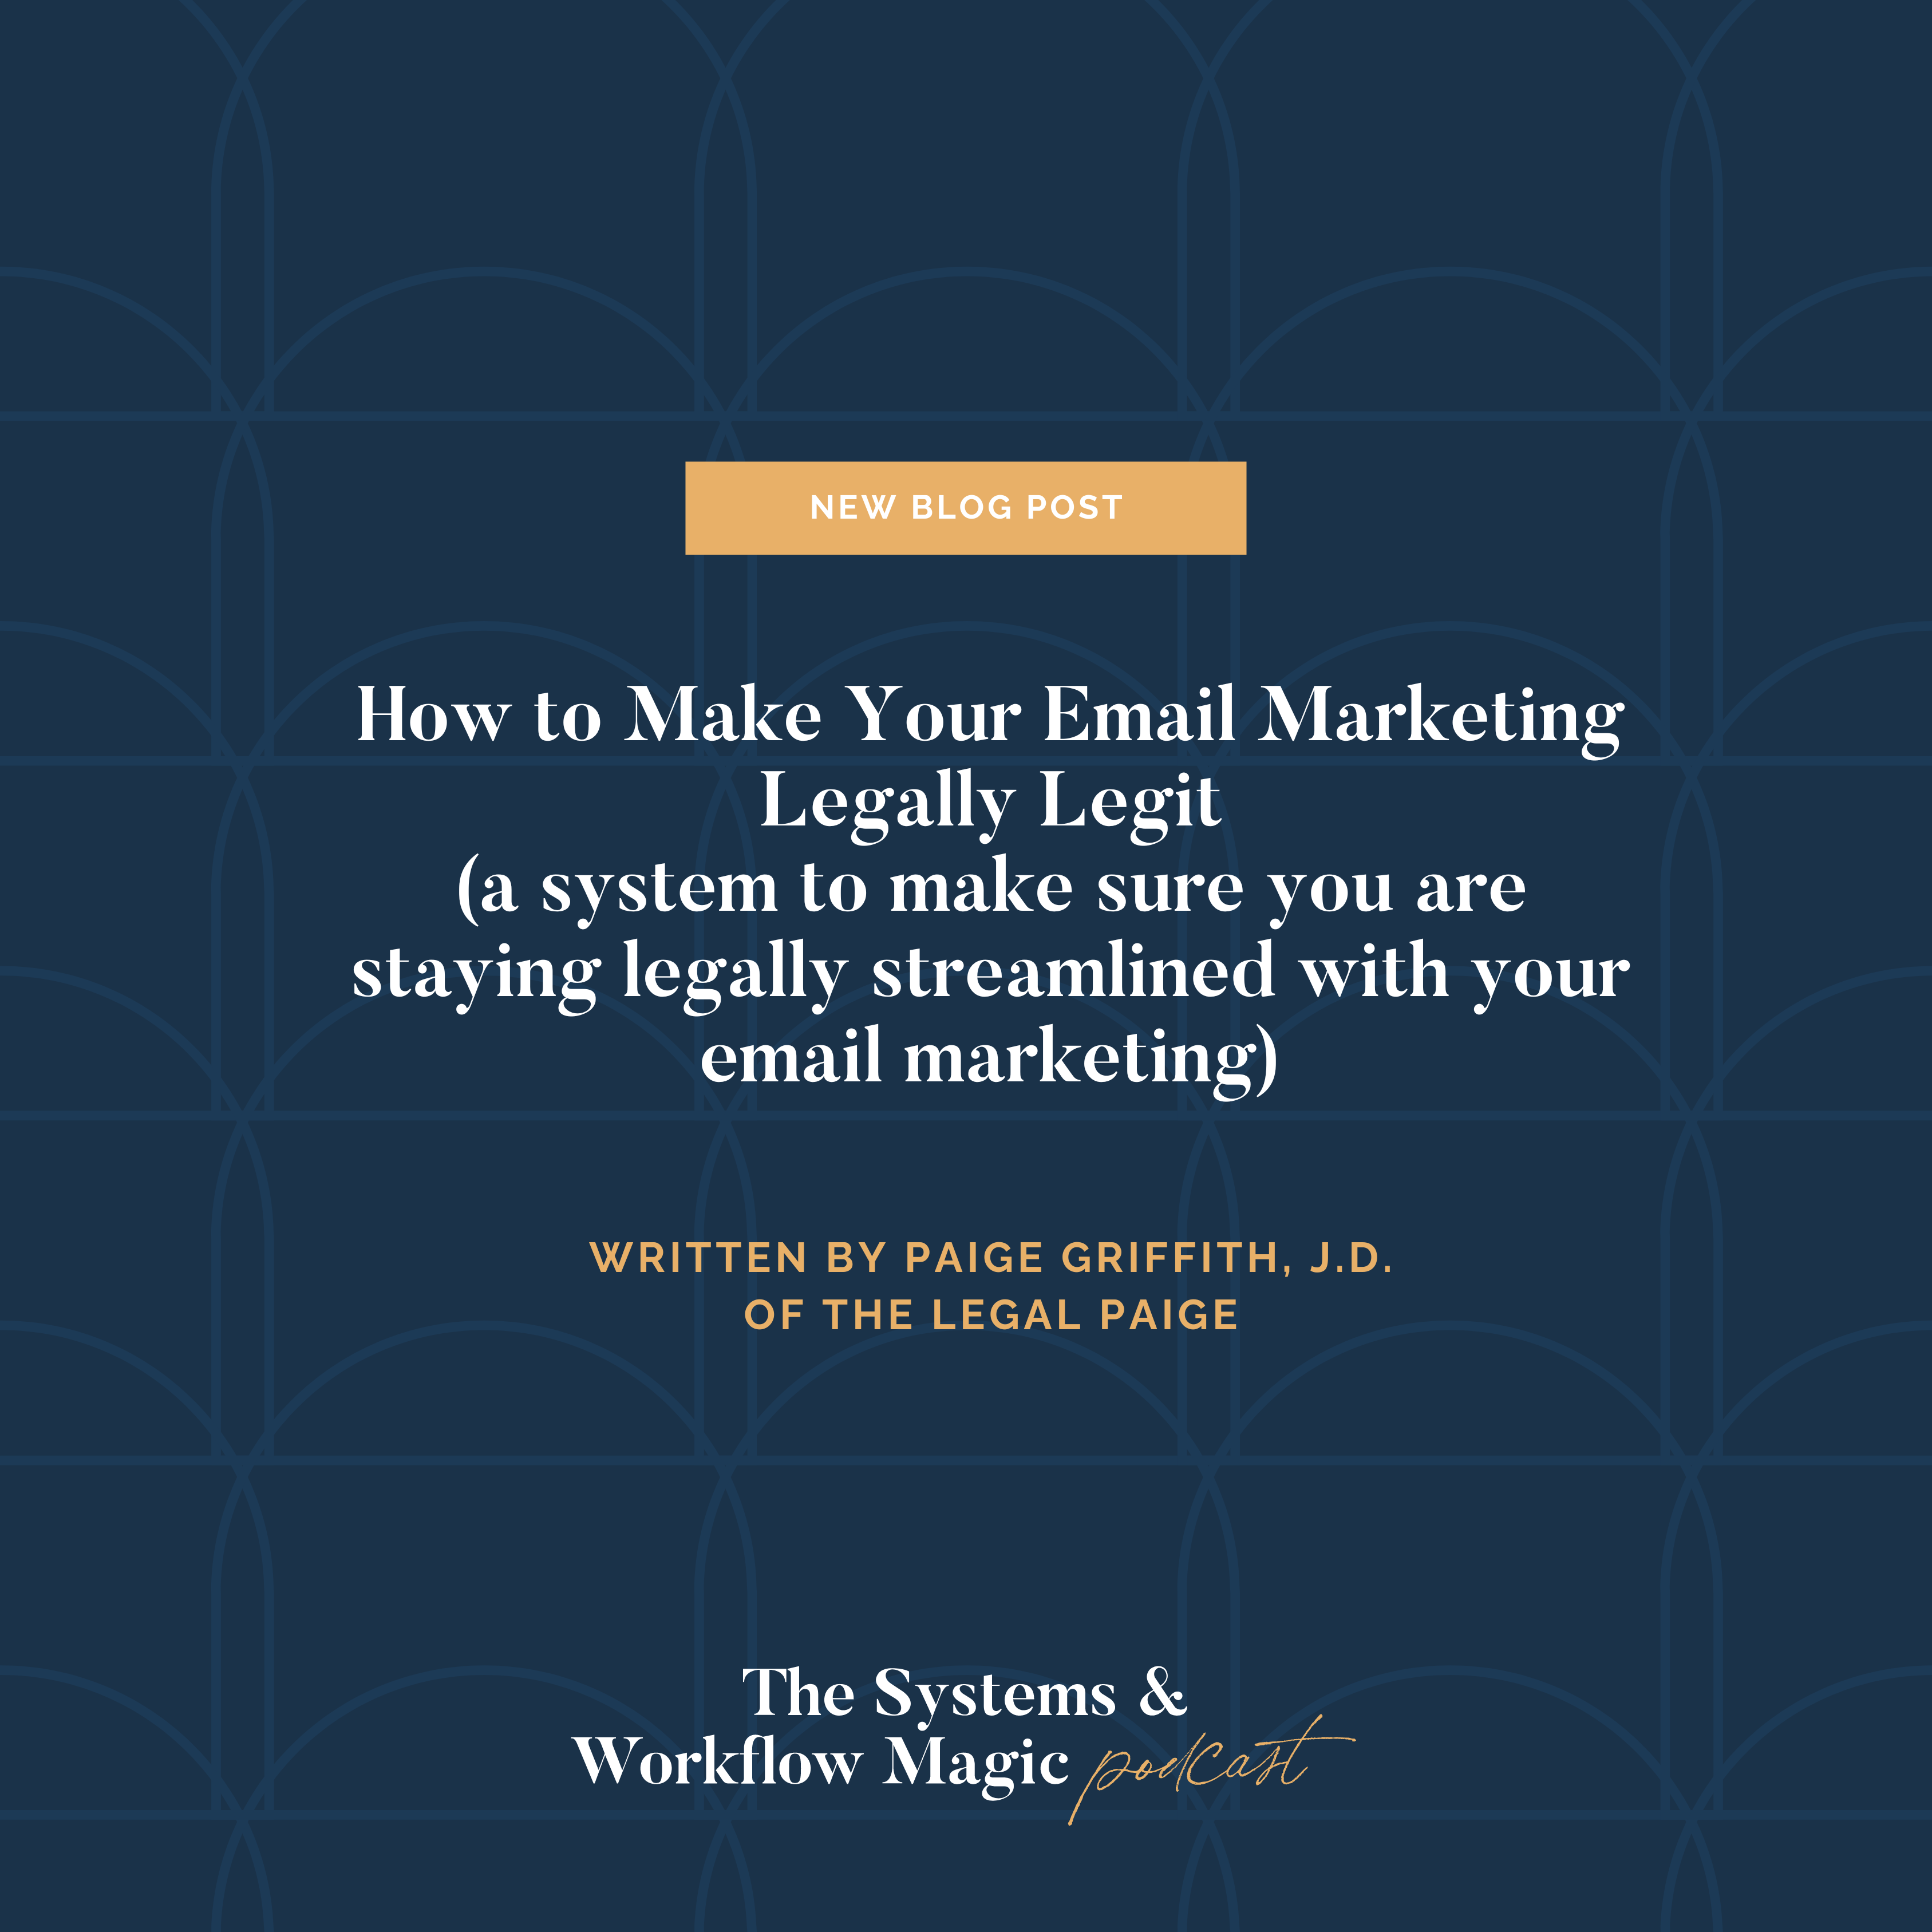 featured_blog_post_how_to_make_your_email_marketing_legally_legit_with_Paige_griffith_of_the_legal_paige